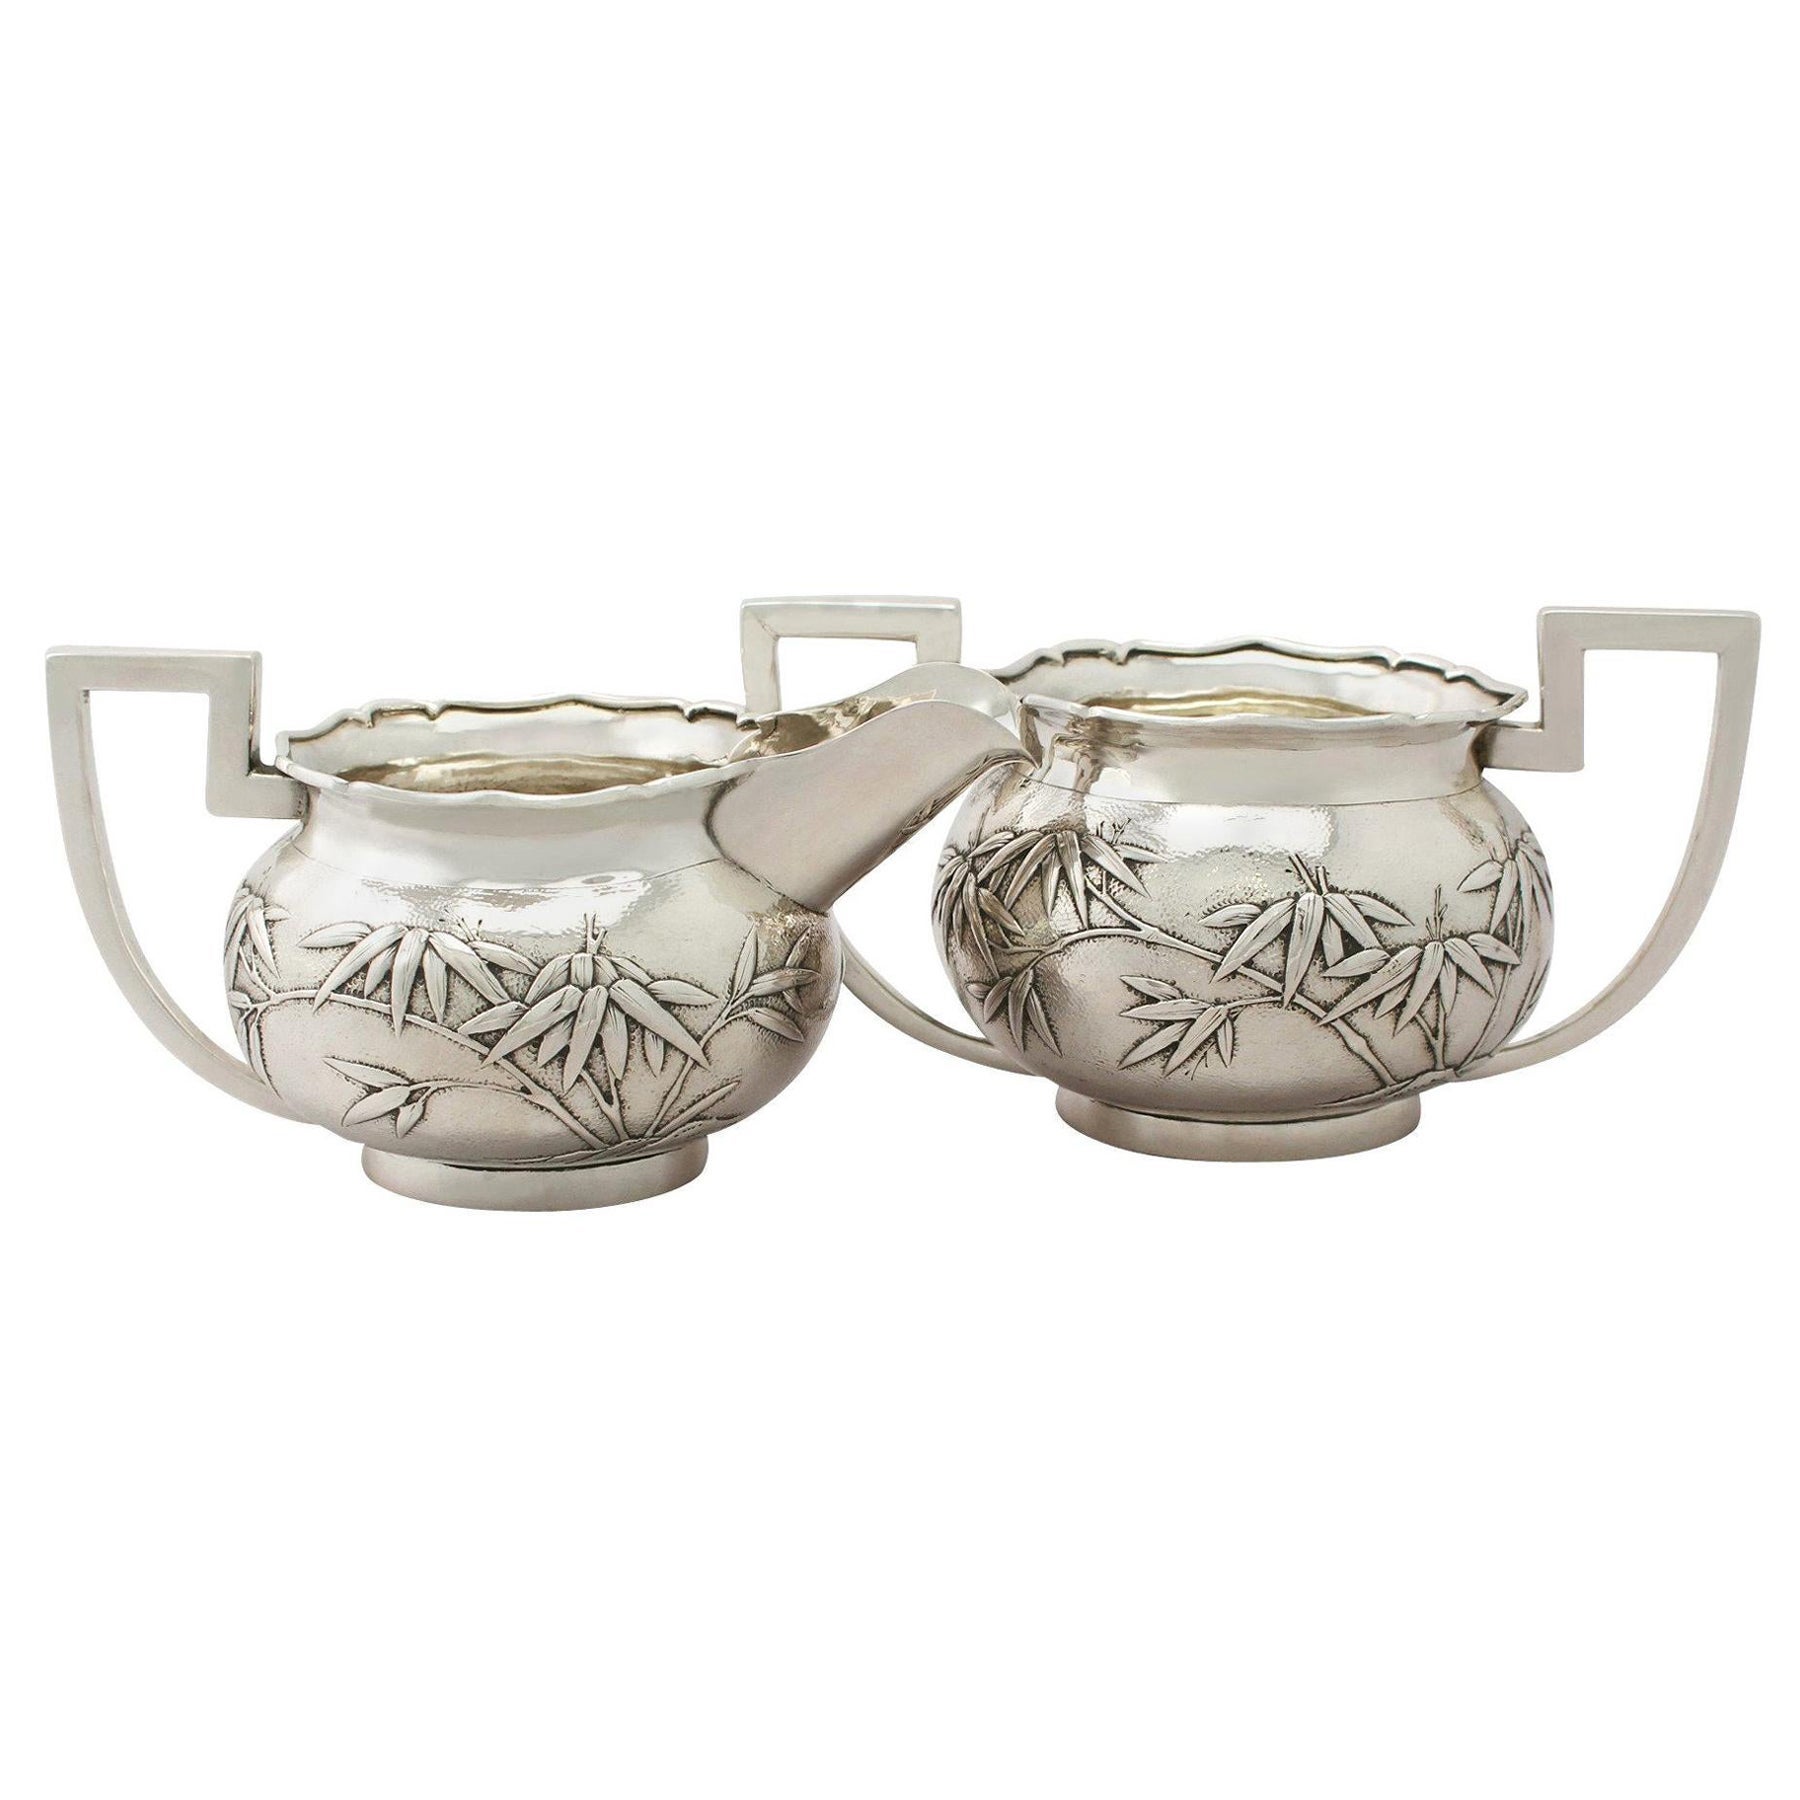 1900s Chinese Export Silver Cream Jug / Creamer and Sugar Bowl (Crémier et Sucrier)